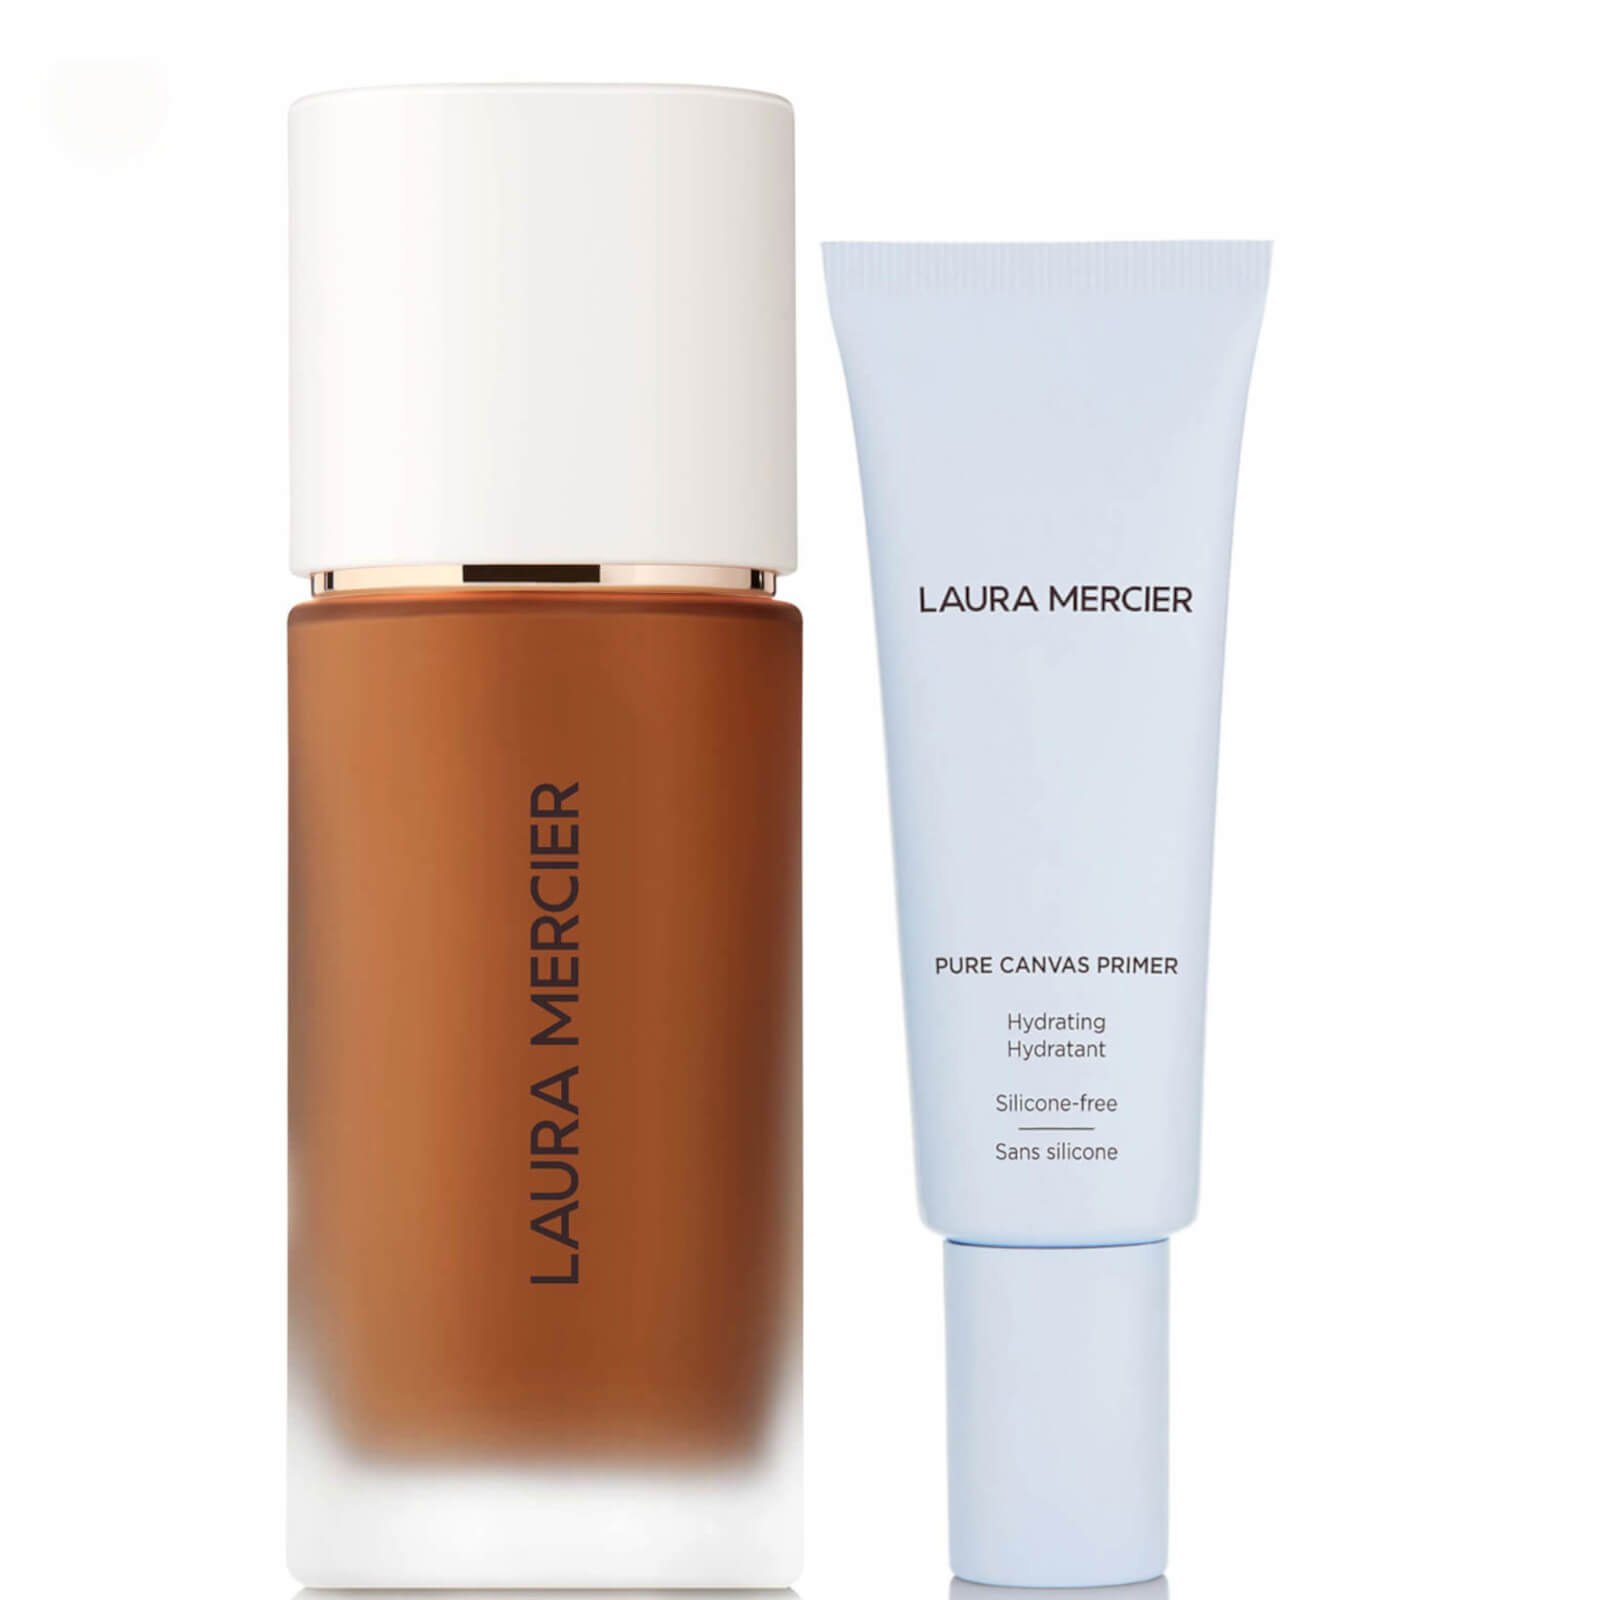 Laura Mercier Real Flawless Foundation and Pure Canvas Hydrating Primer Bundle (Various Shades) - 6W1 Ganache